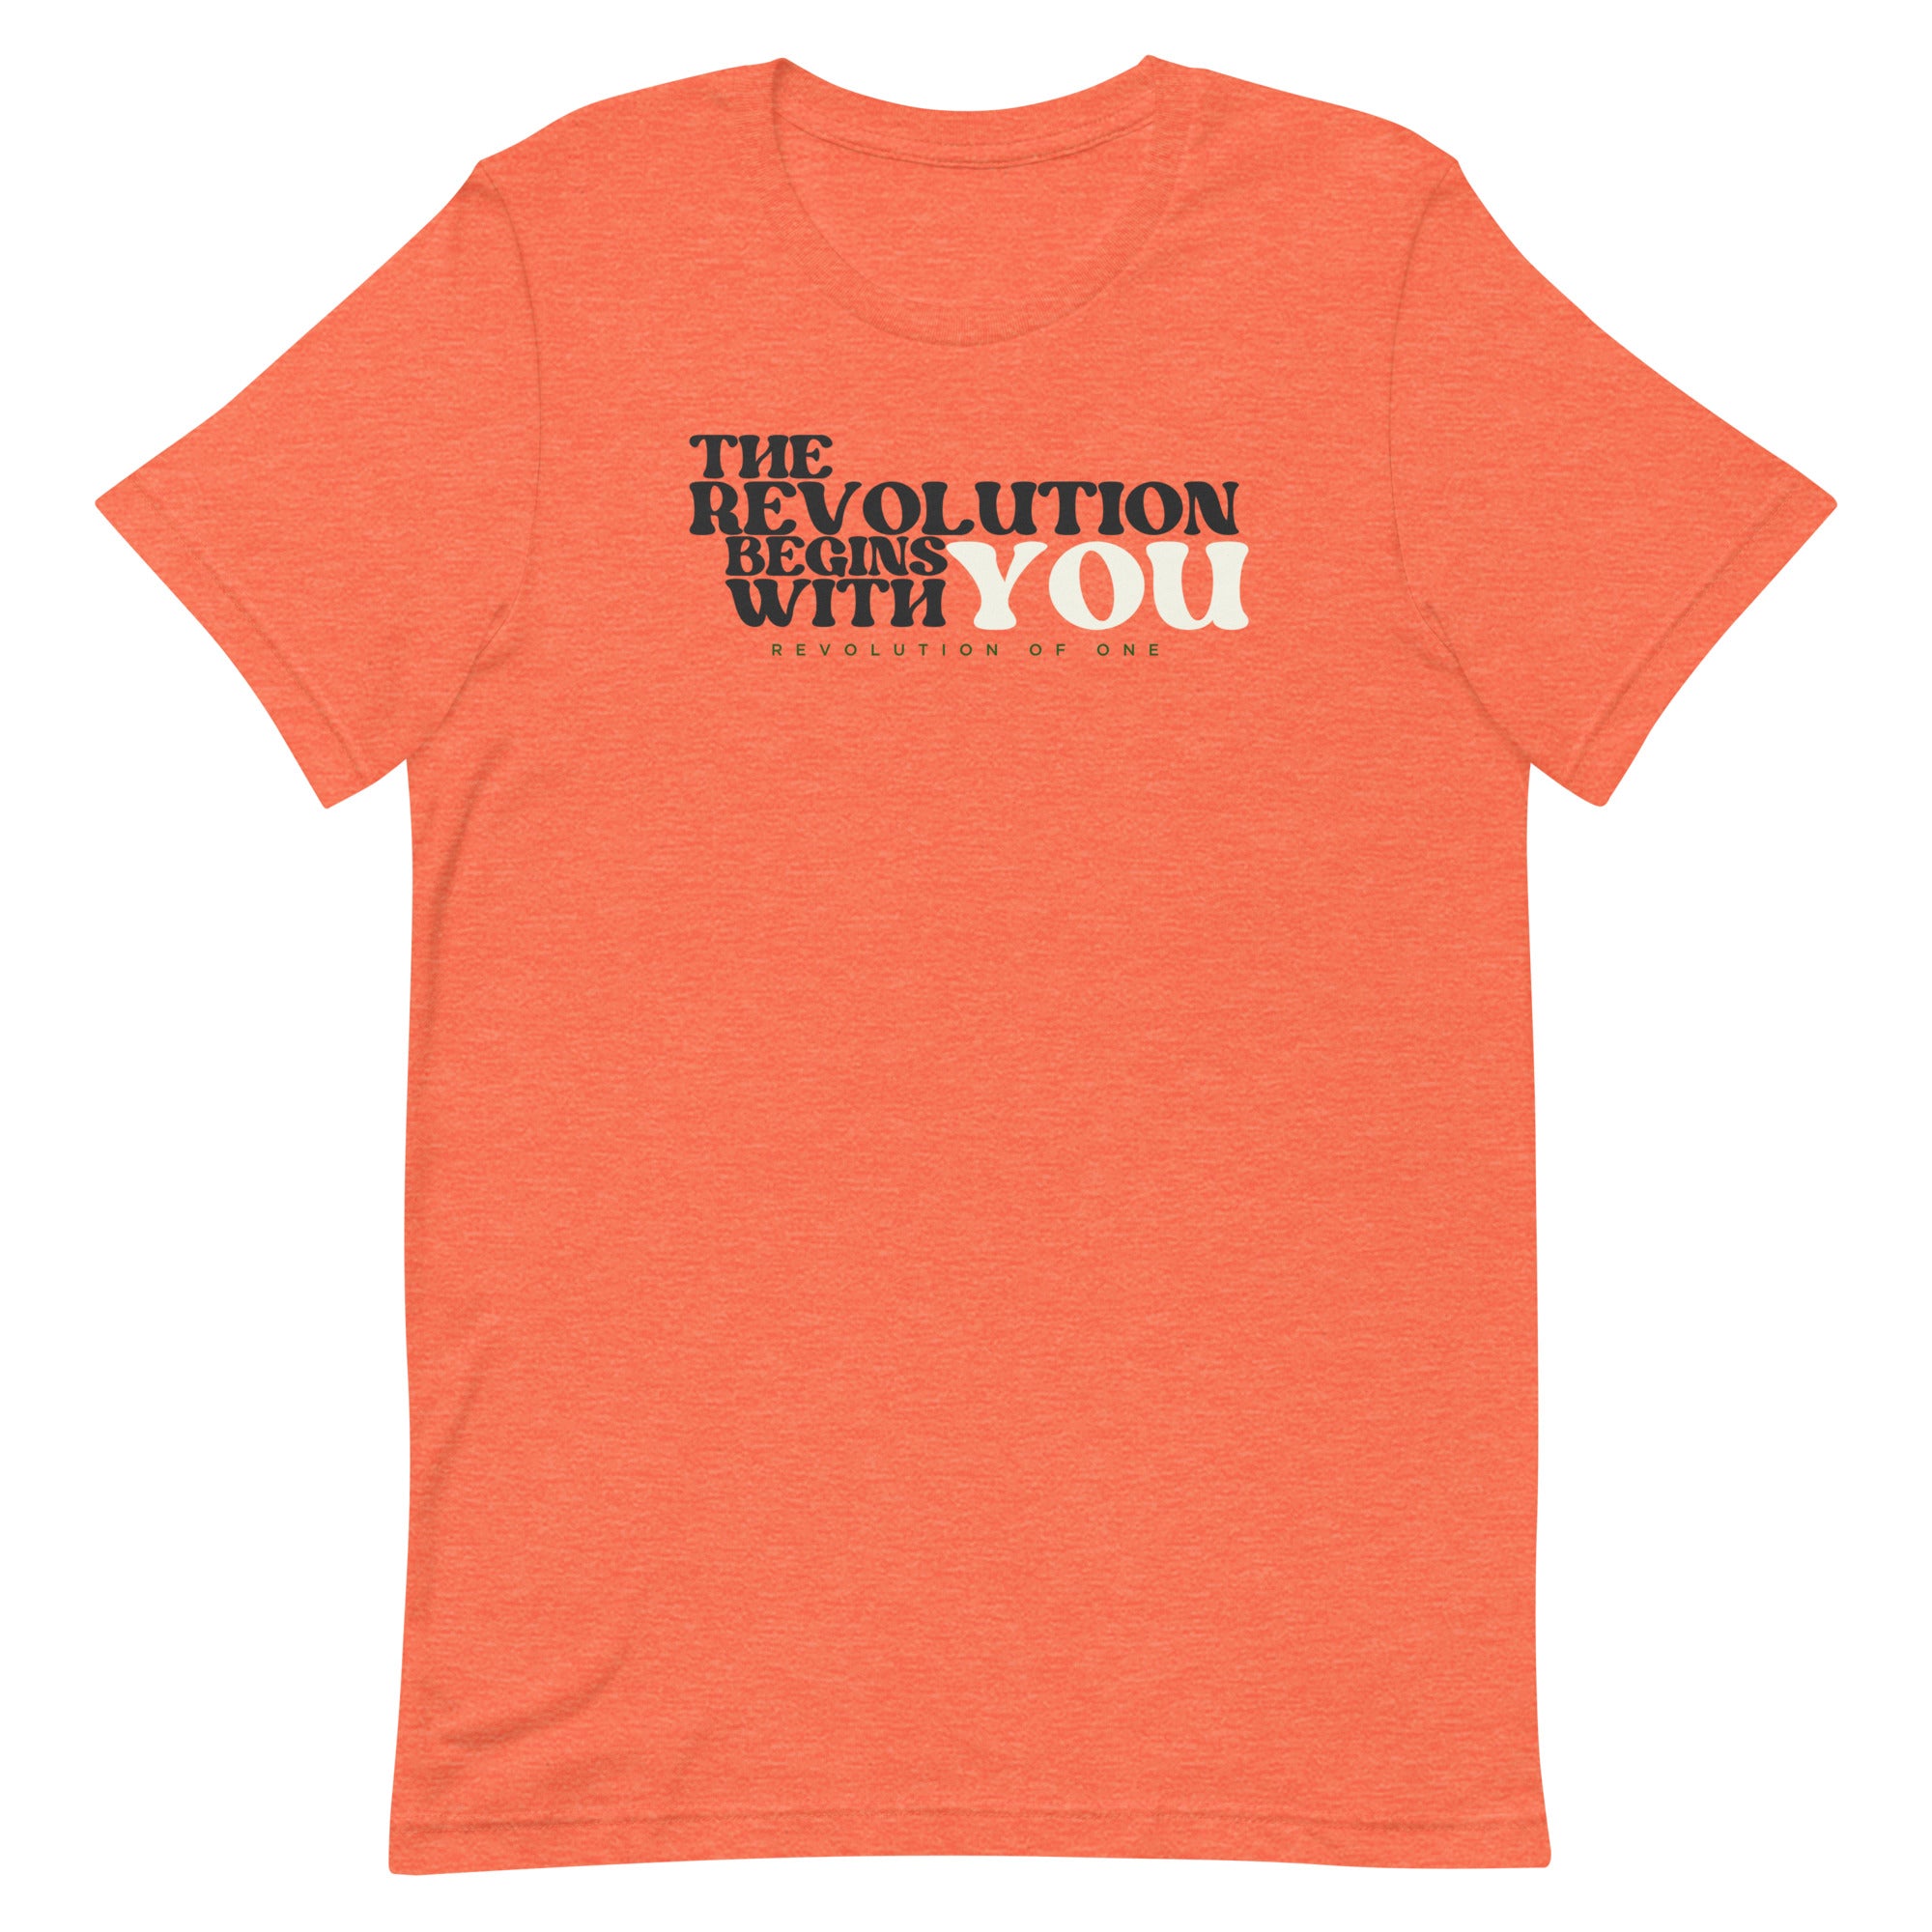 The Revolution Begins with You Tee